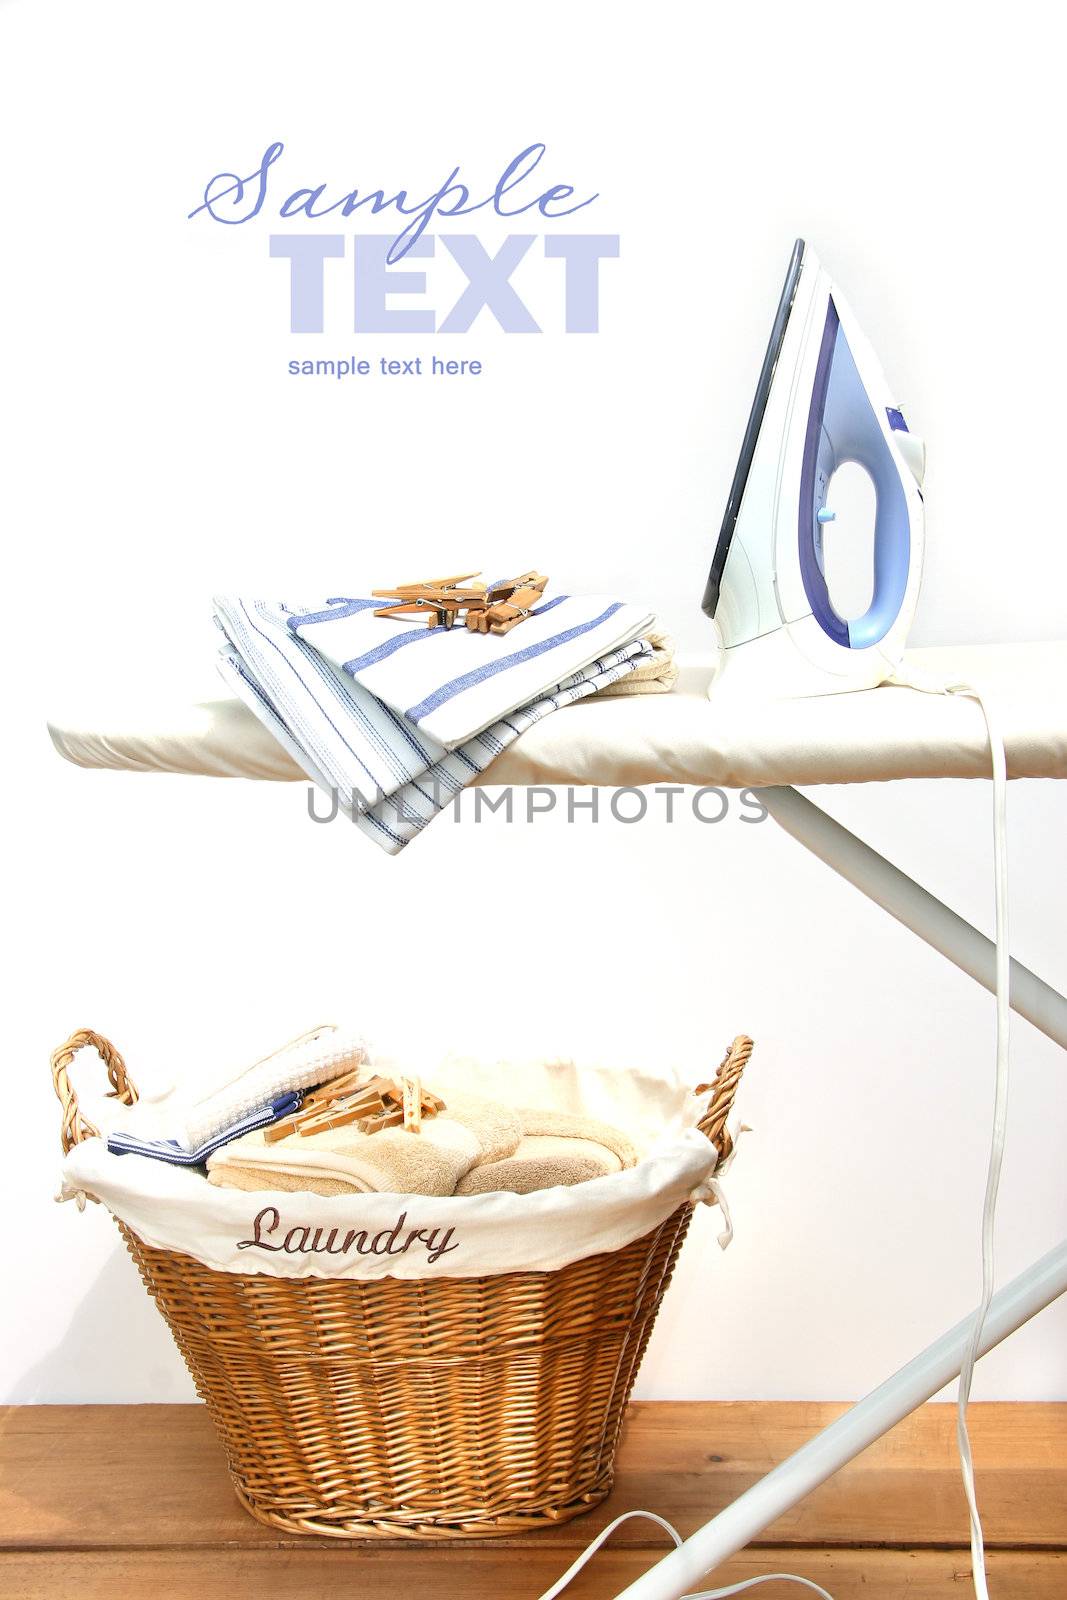 Ironing board with laundry against white background